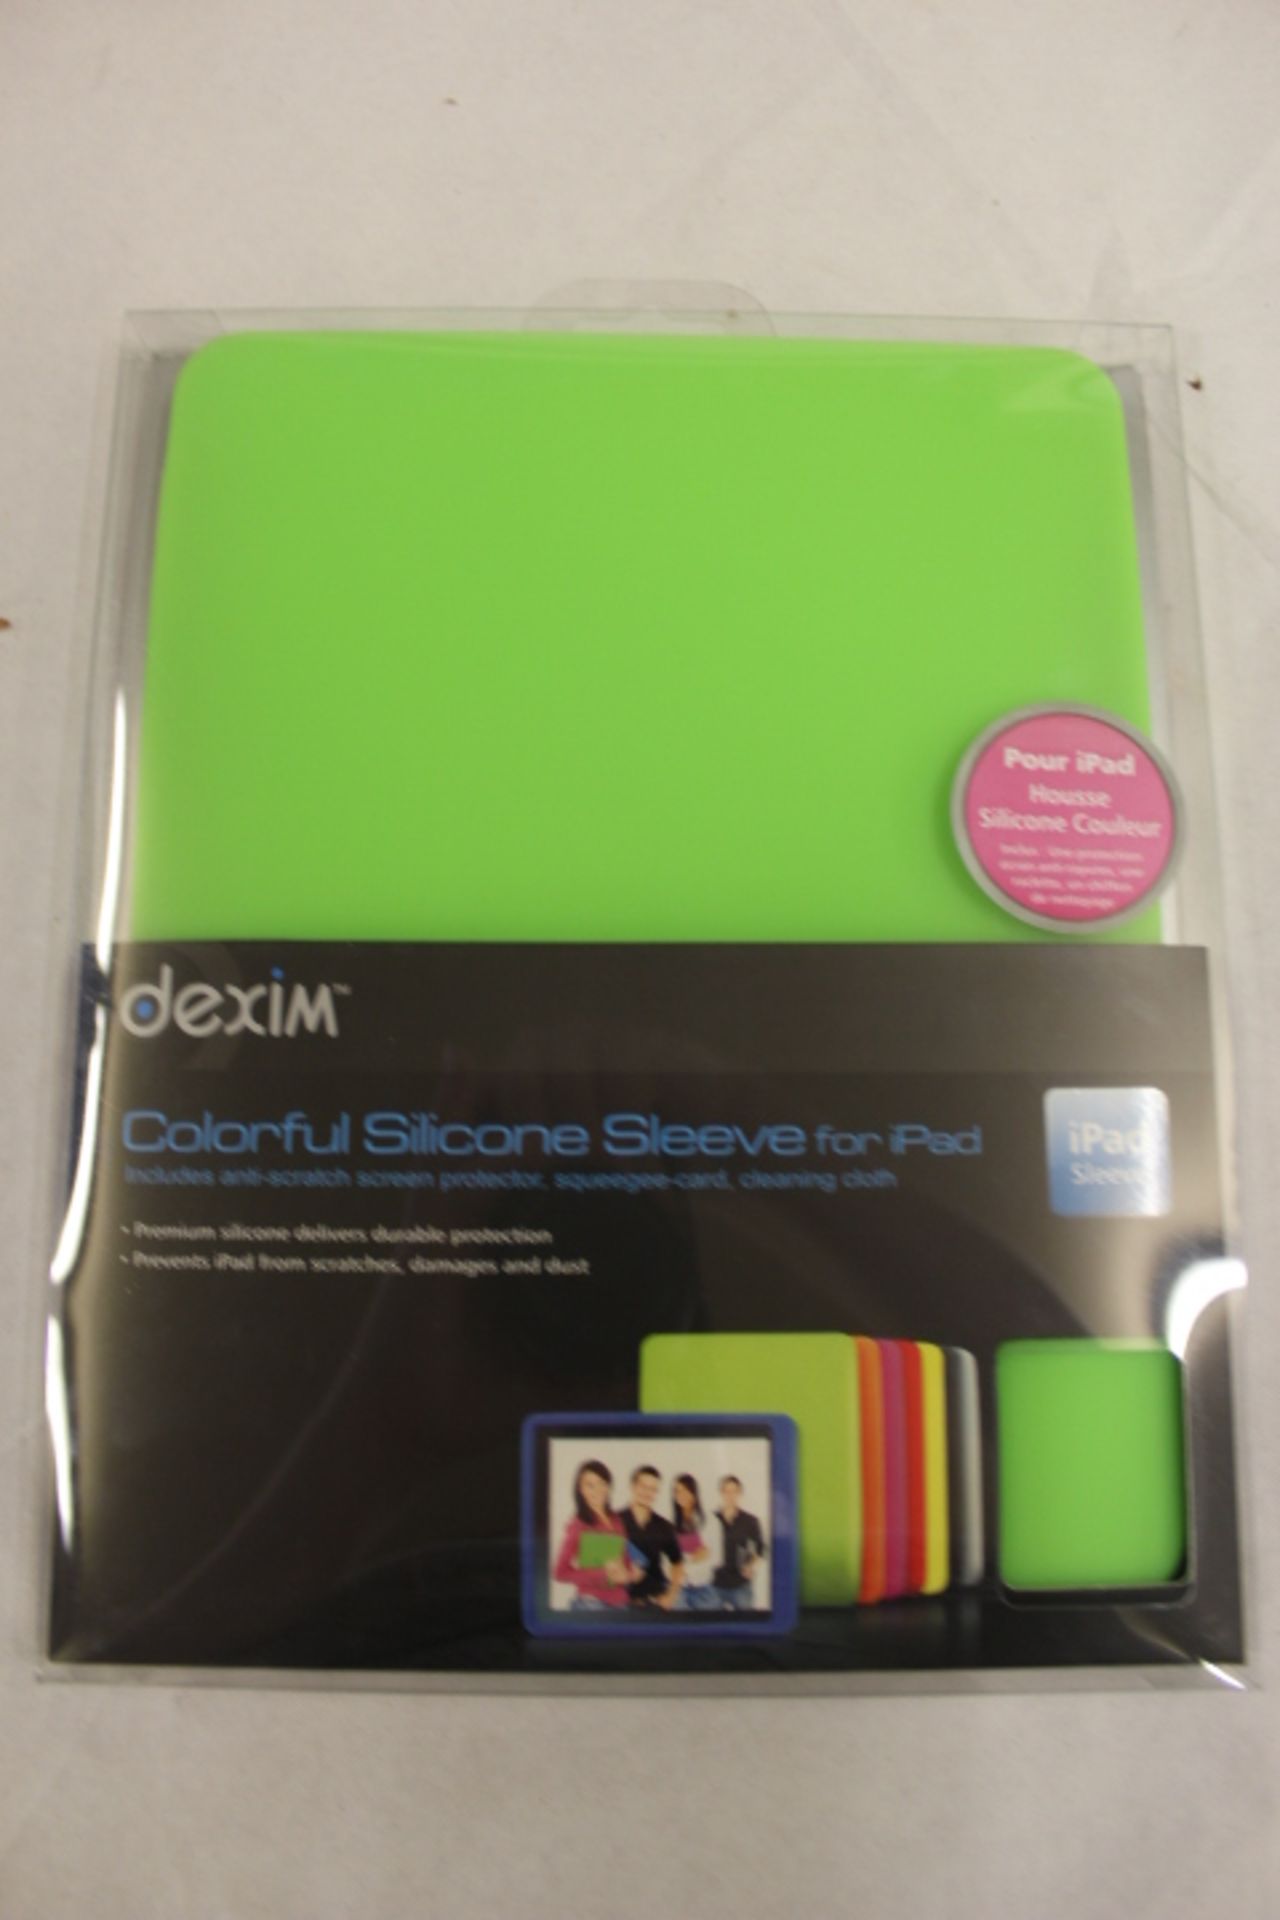 V  Grade A Green Silicone Ipad sleeve X  2  Bid price to be multiplied by Two